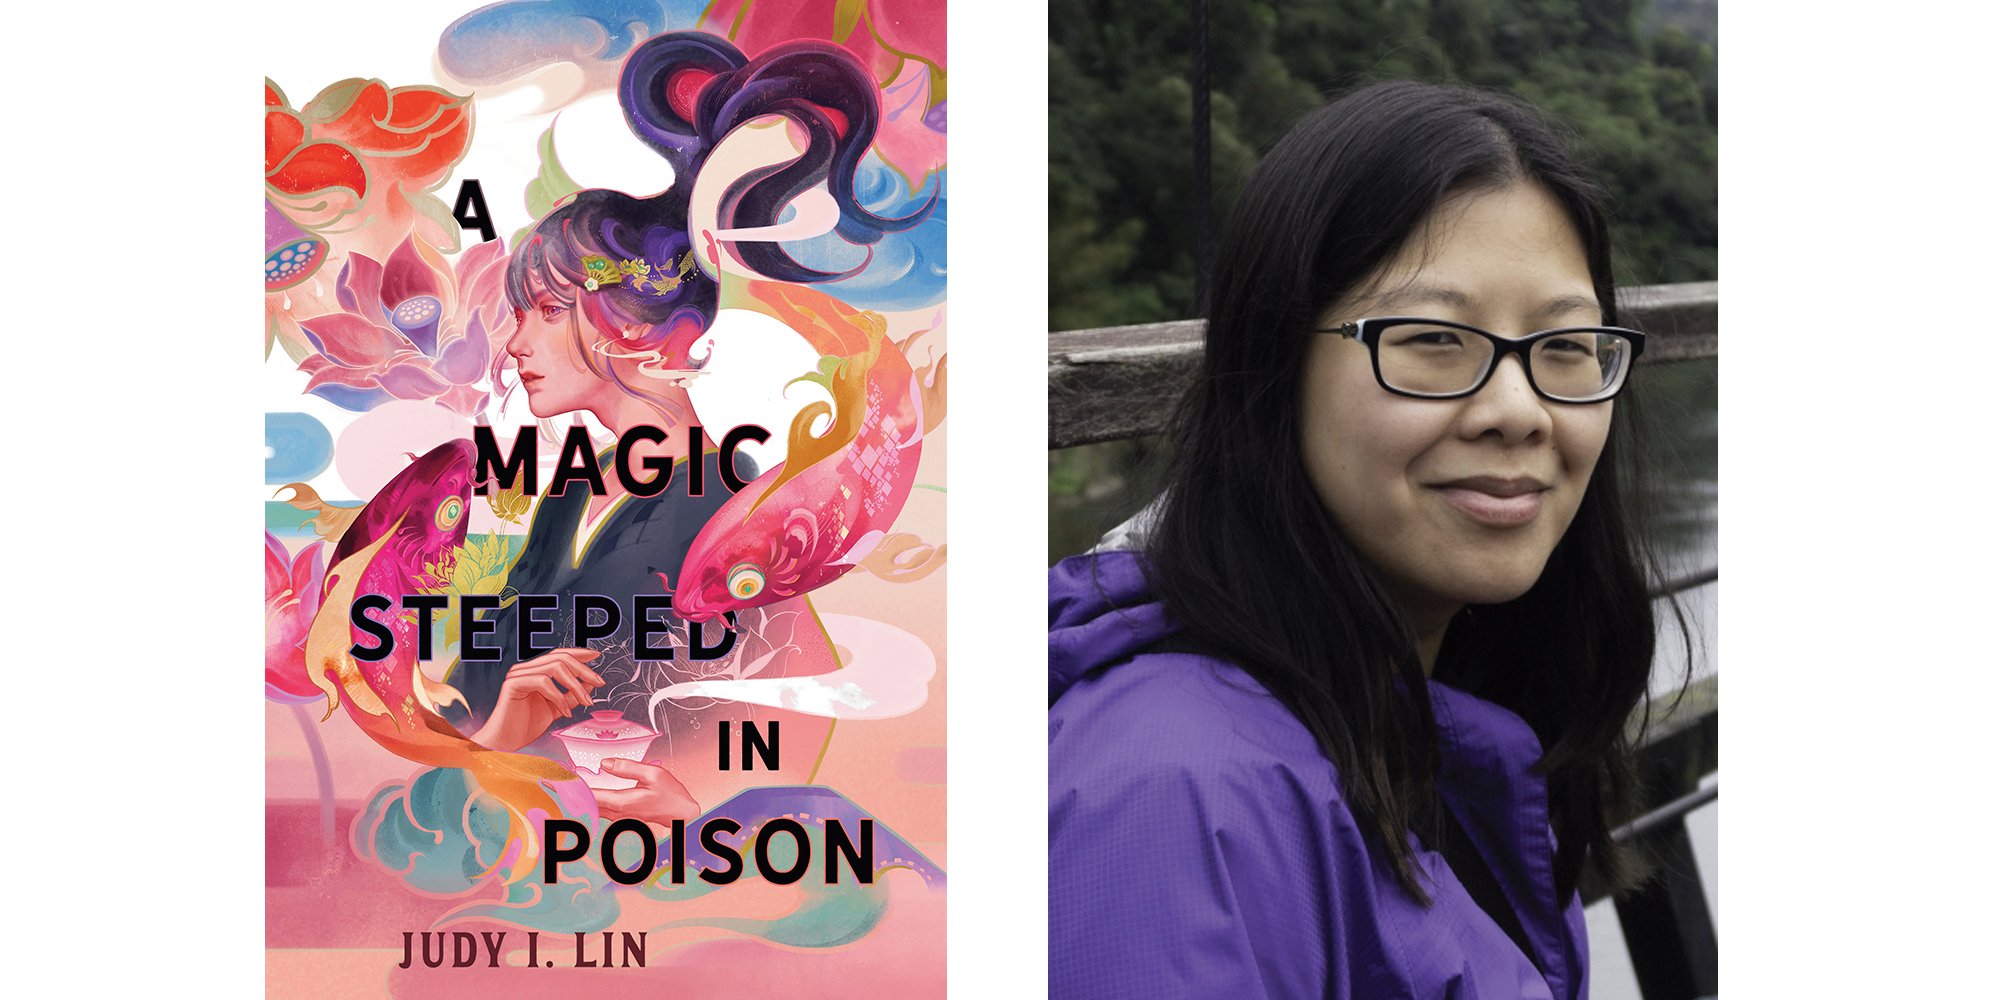 Cover of A Magic Steeped in Poison; A woman with long black hair wearing glasses and a purple hooded jacket